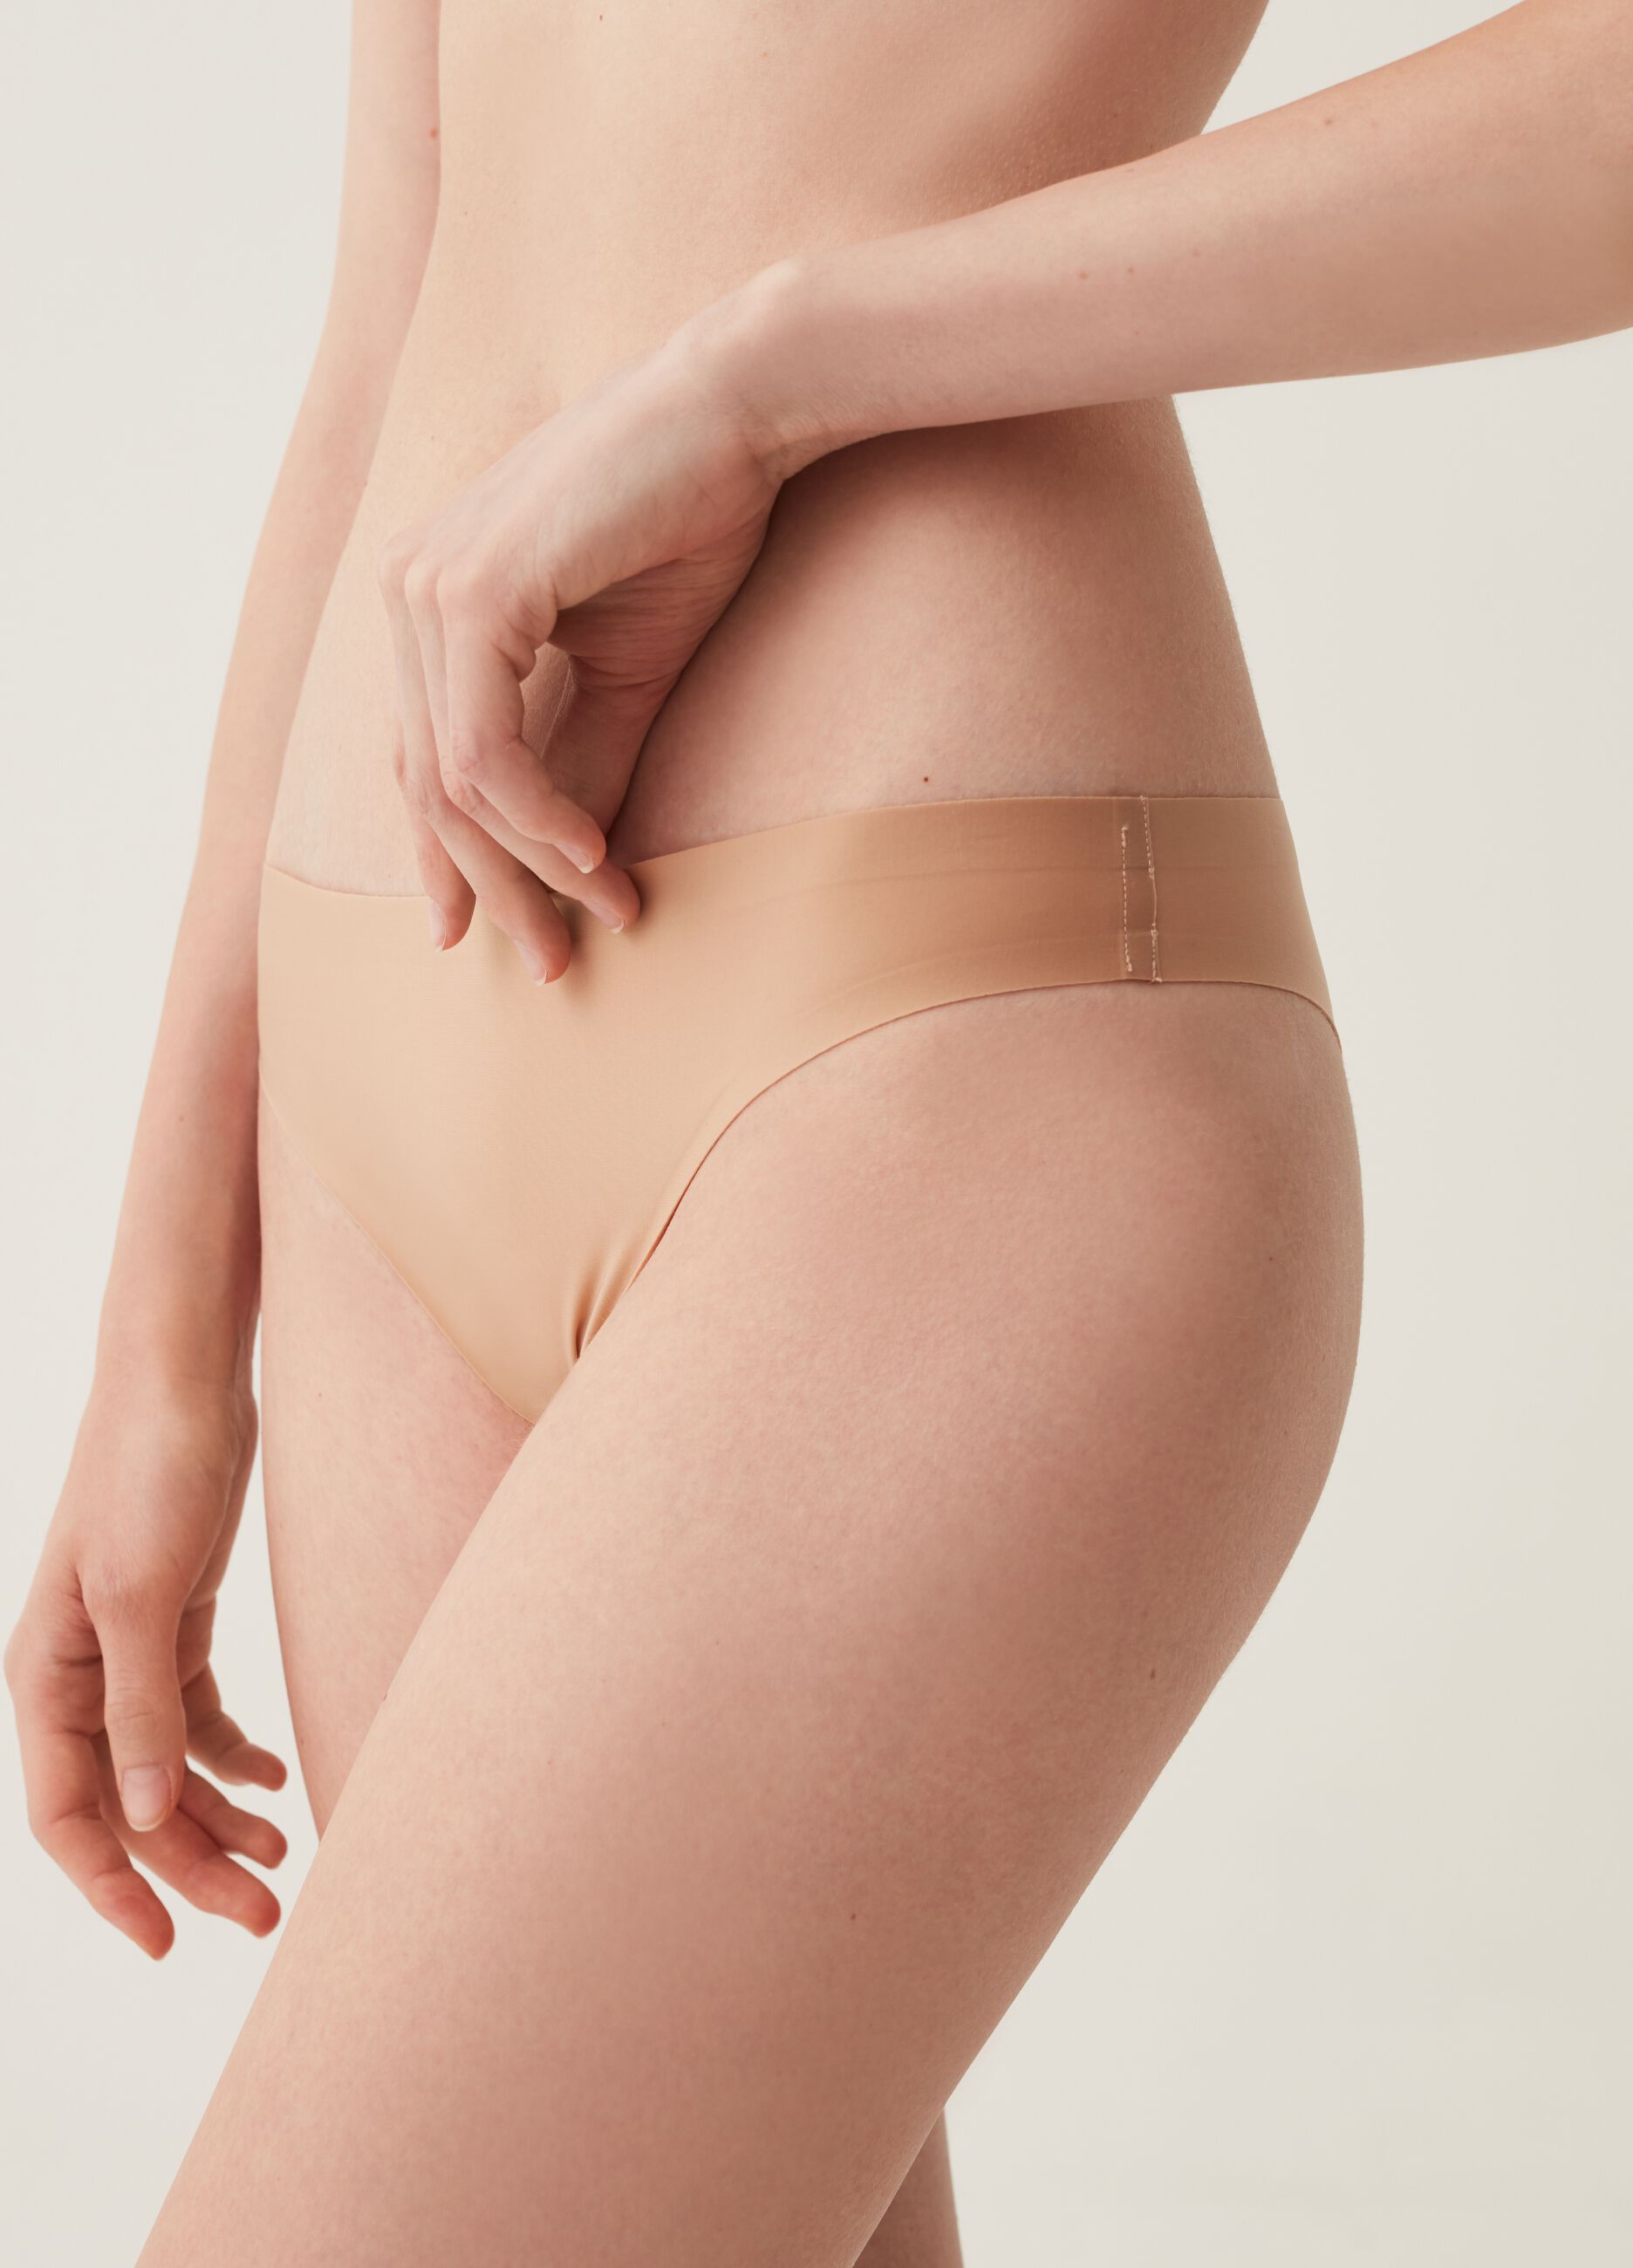 Woman's Nude The One Brazilian-cut briefs without seams